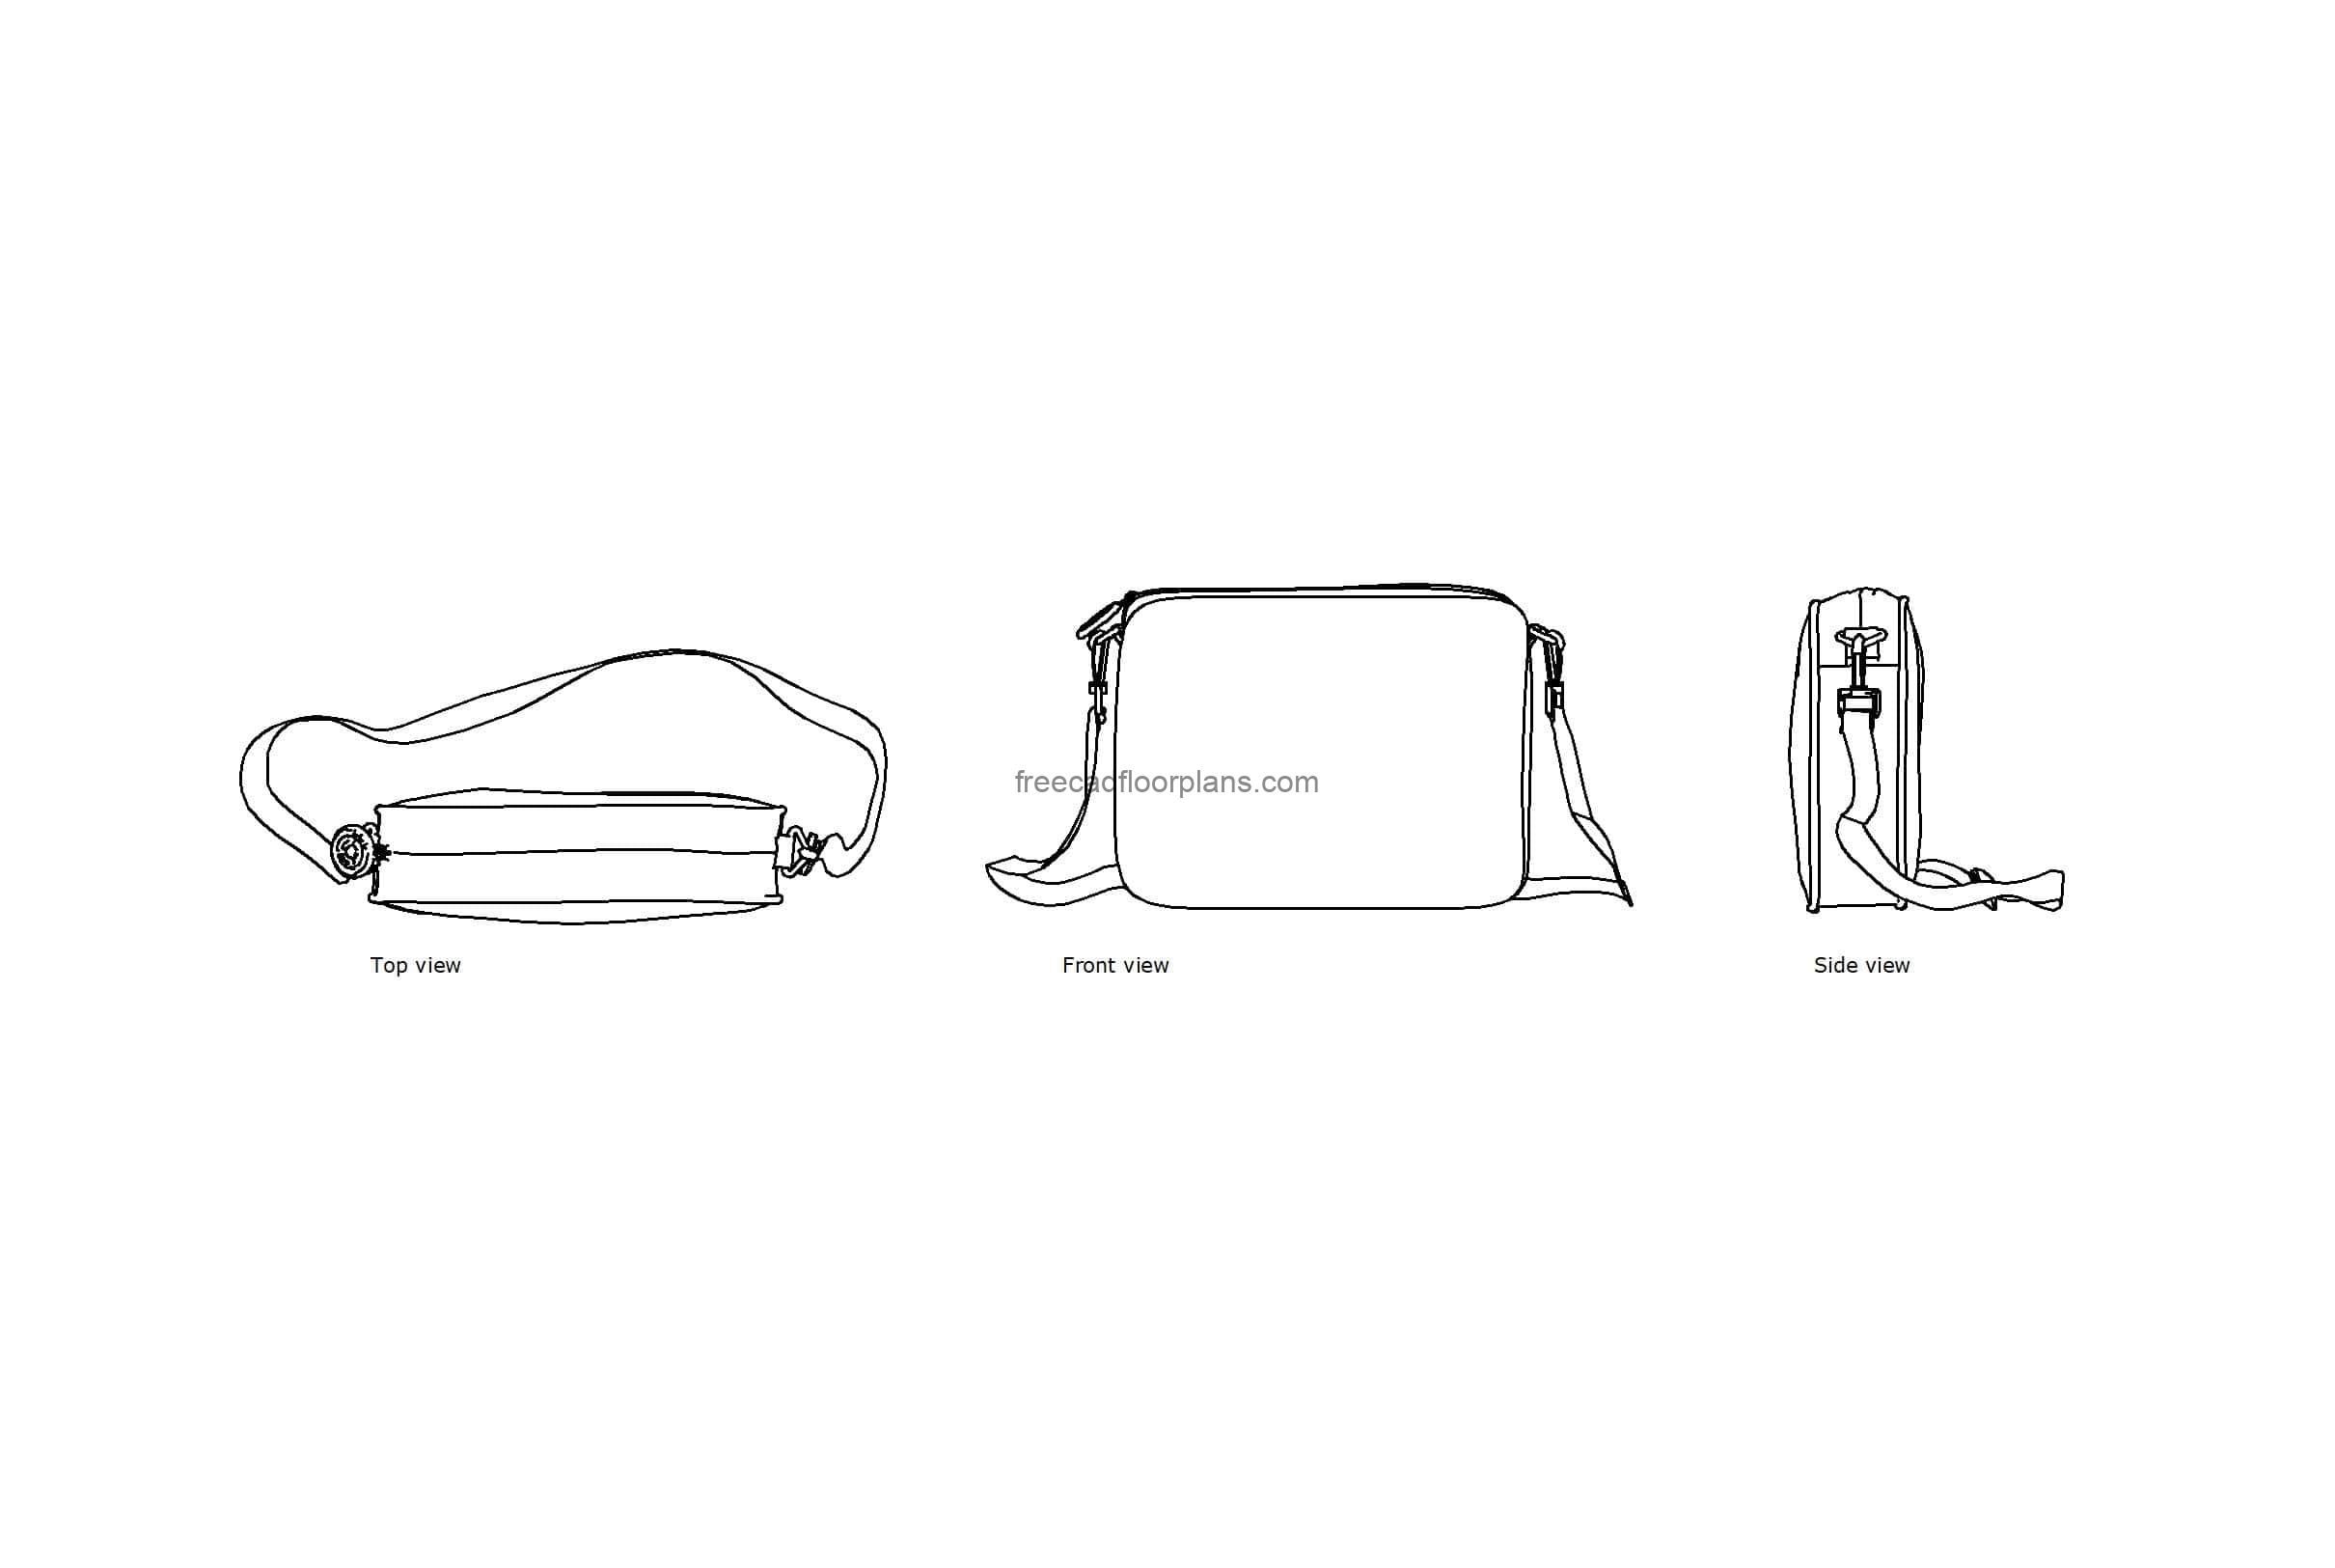 autocad drawing of a womens bag, plan and elevation 2d views, dwg file free for download